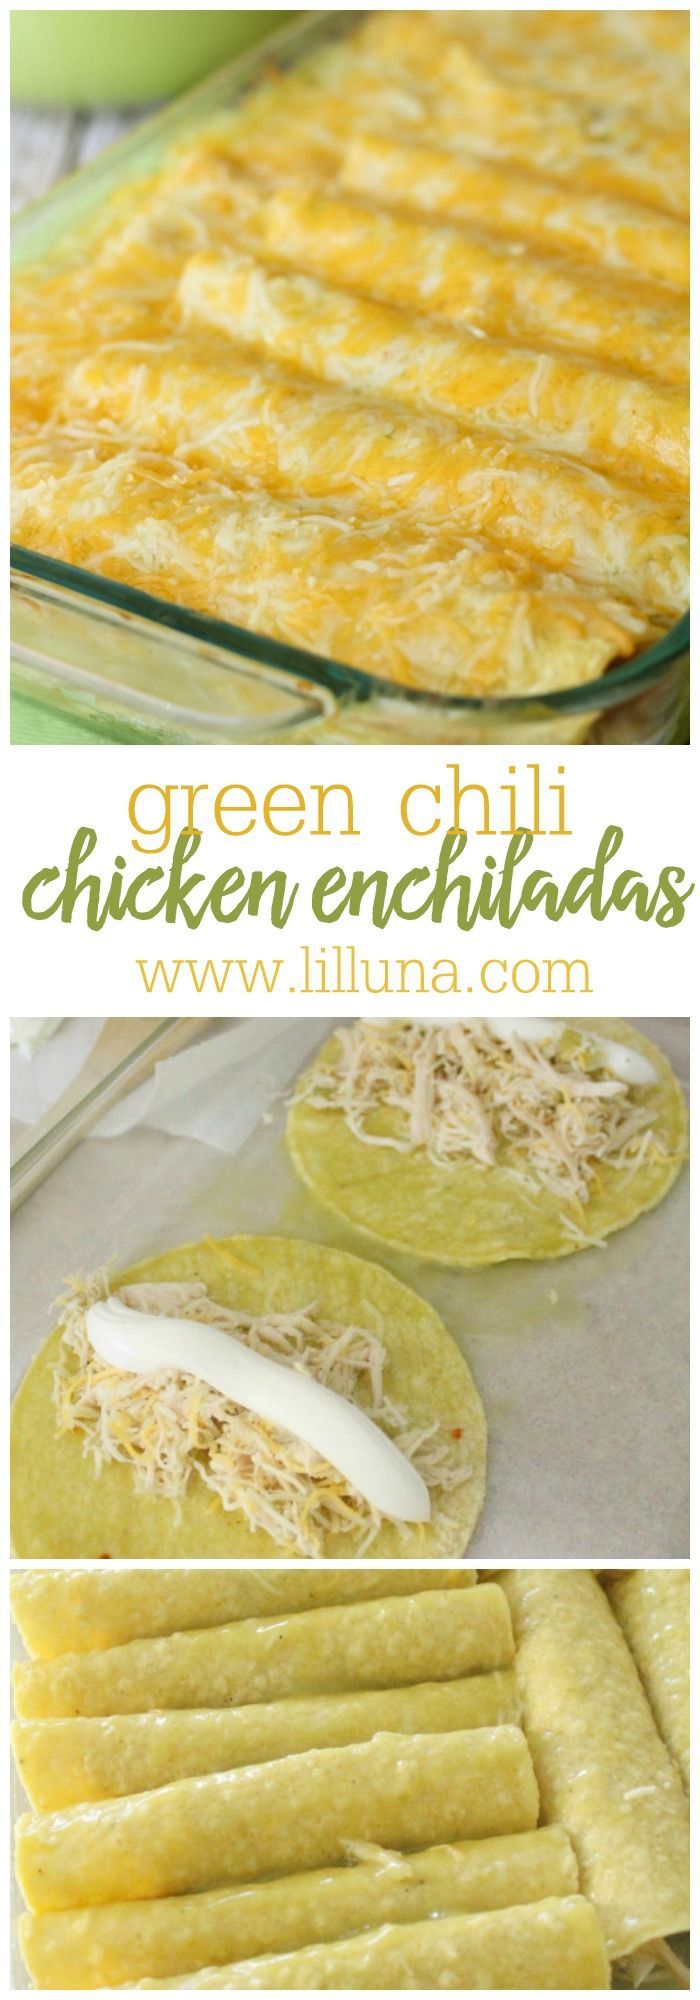 Las Palmas Chicken Enchiladas – such an easy and delicious recipe! Includes shredded chicken, green chili, sour cream, and cheese